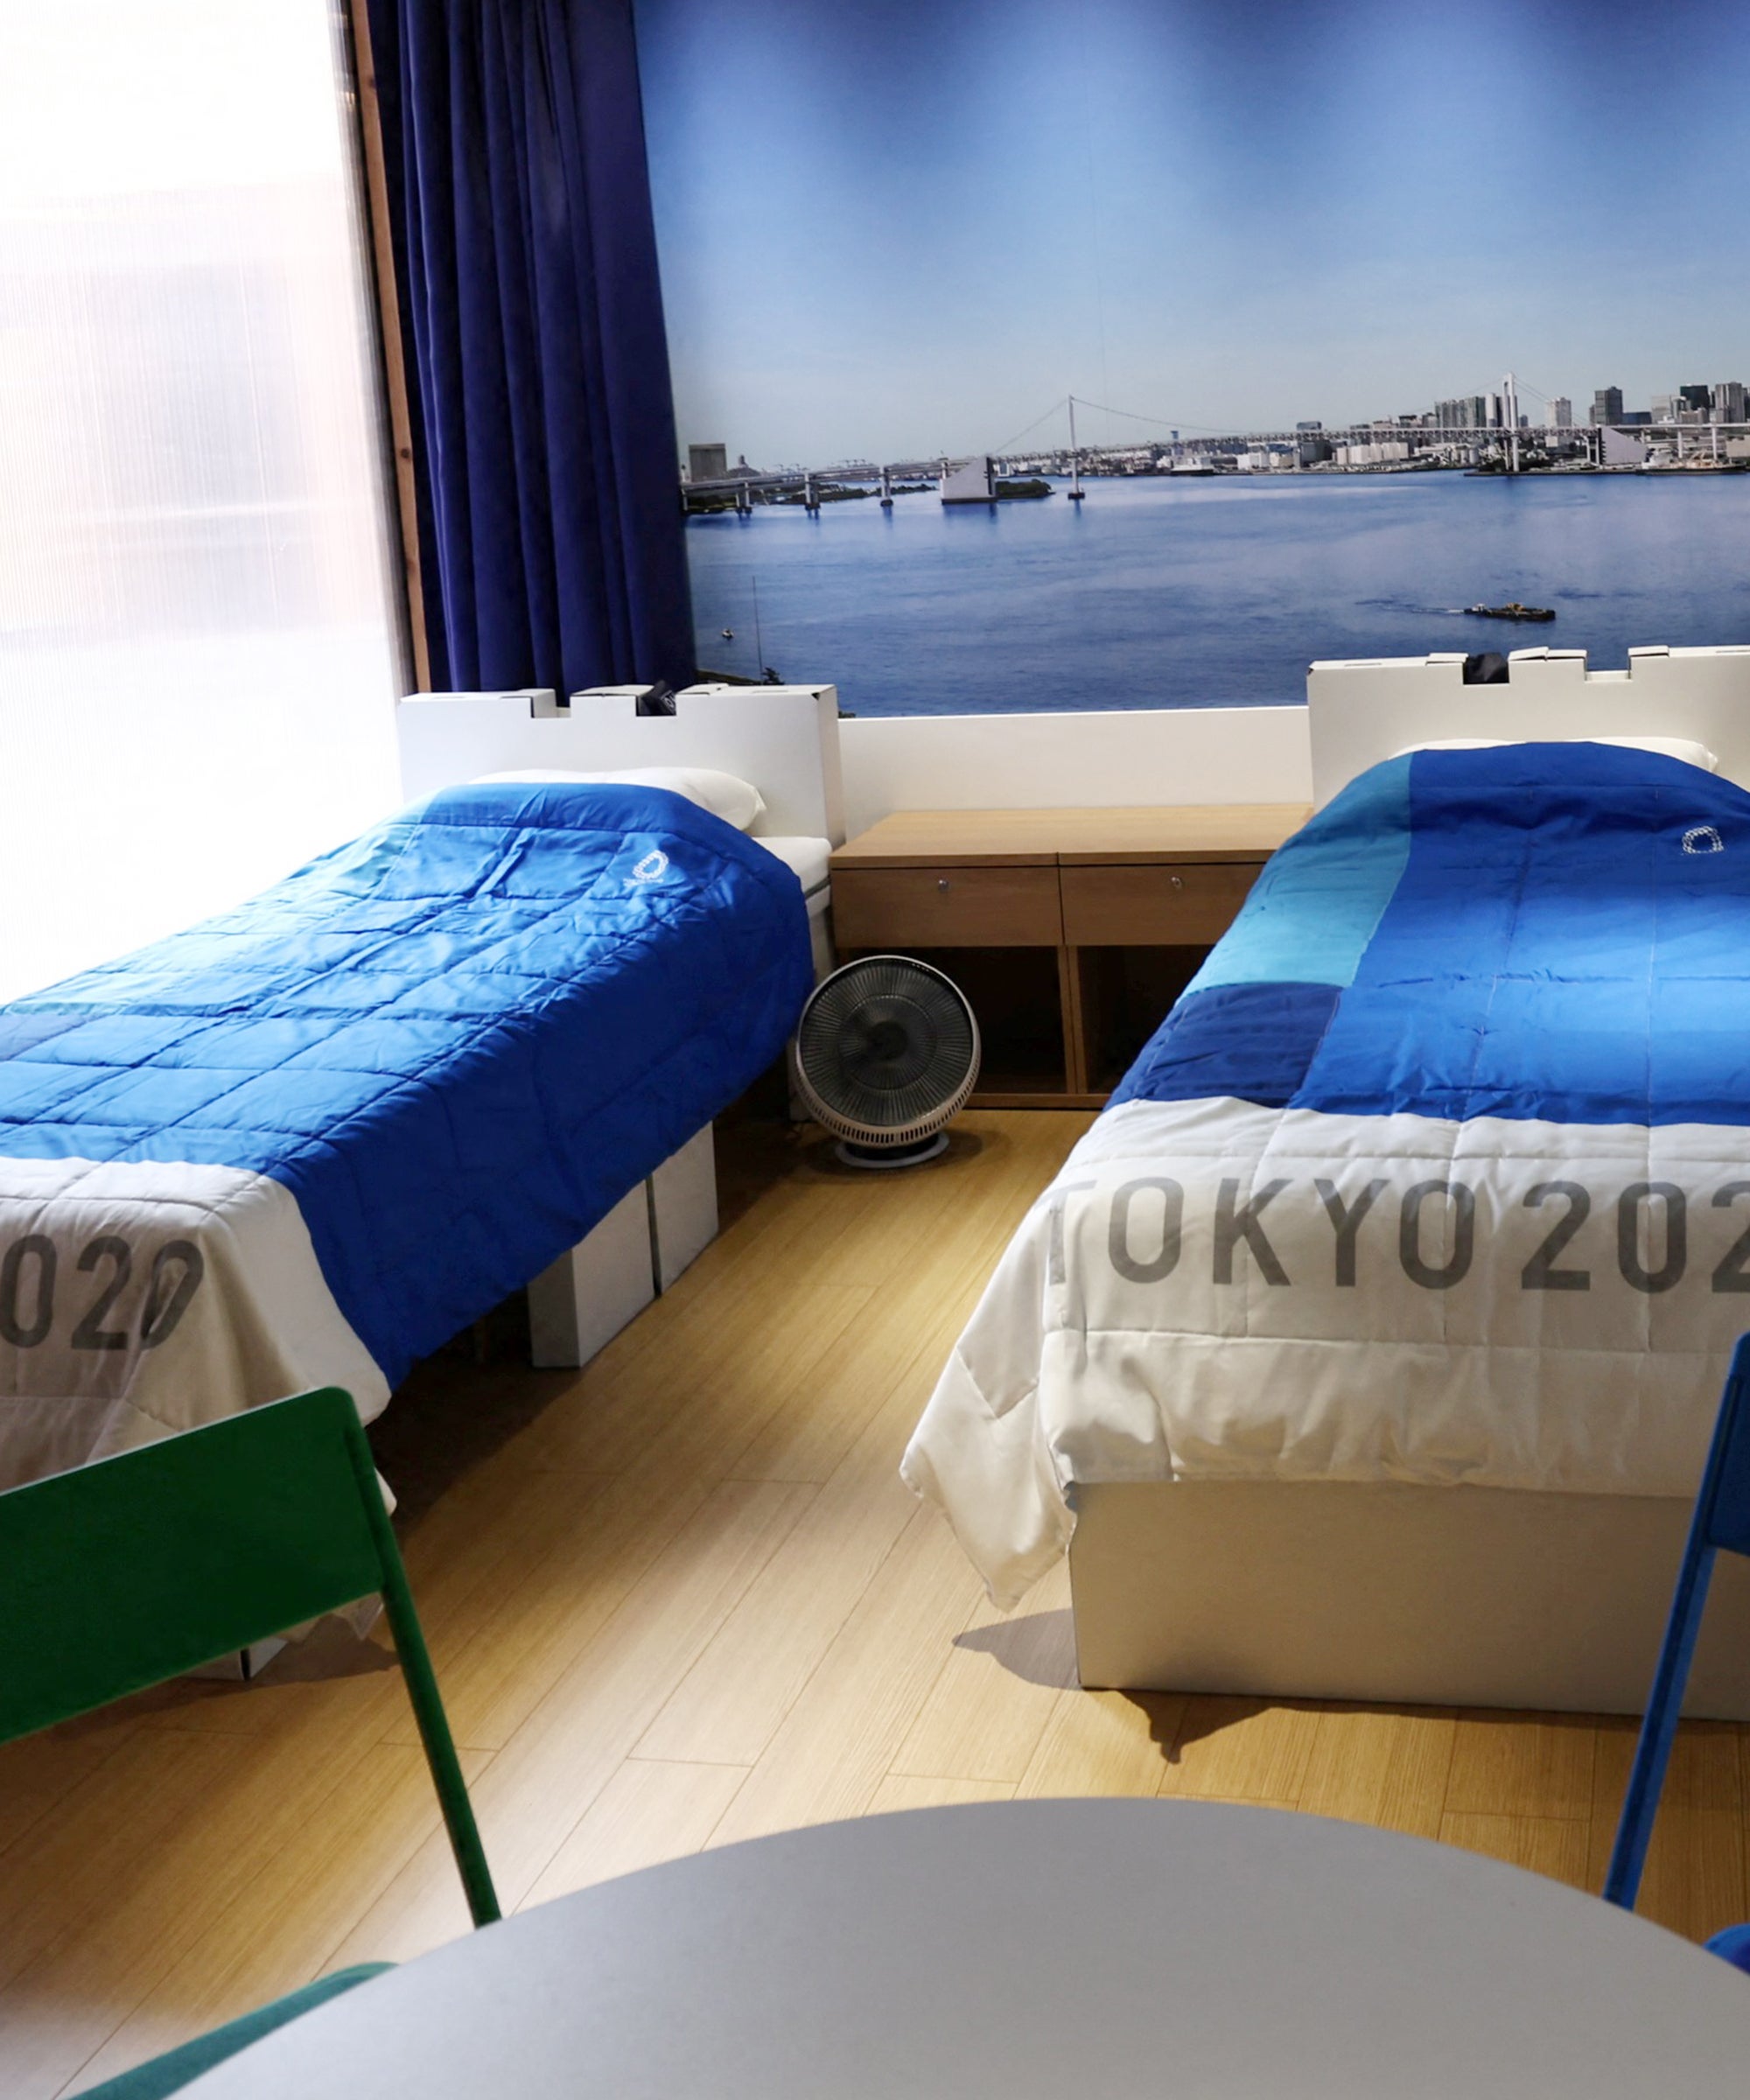 Here's The Difference Between The Bedrooms At The Summer Olympics